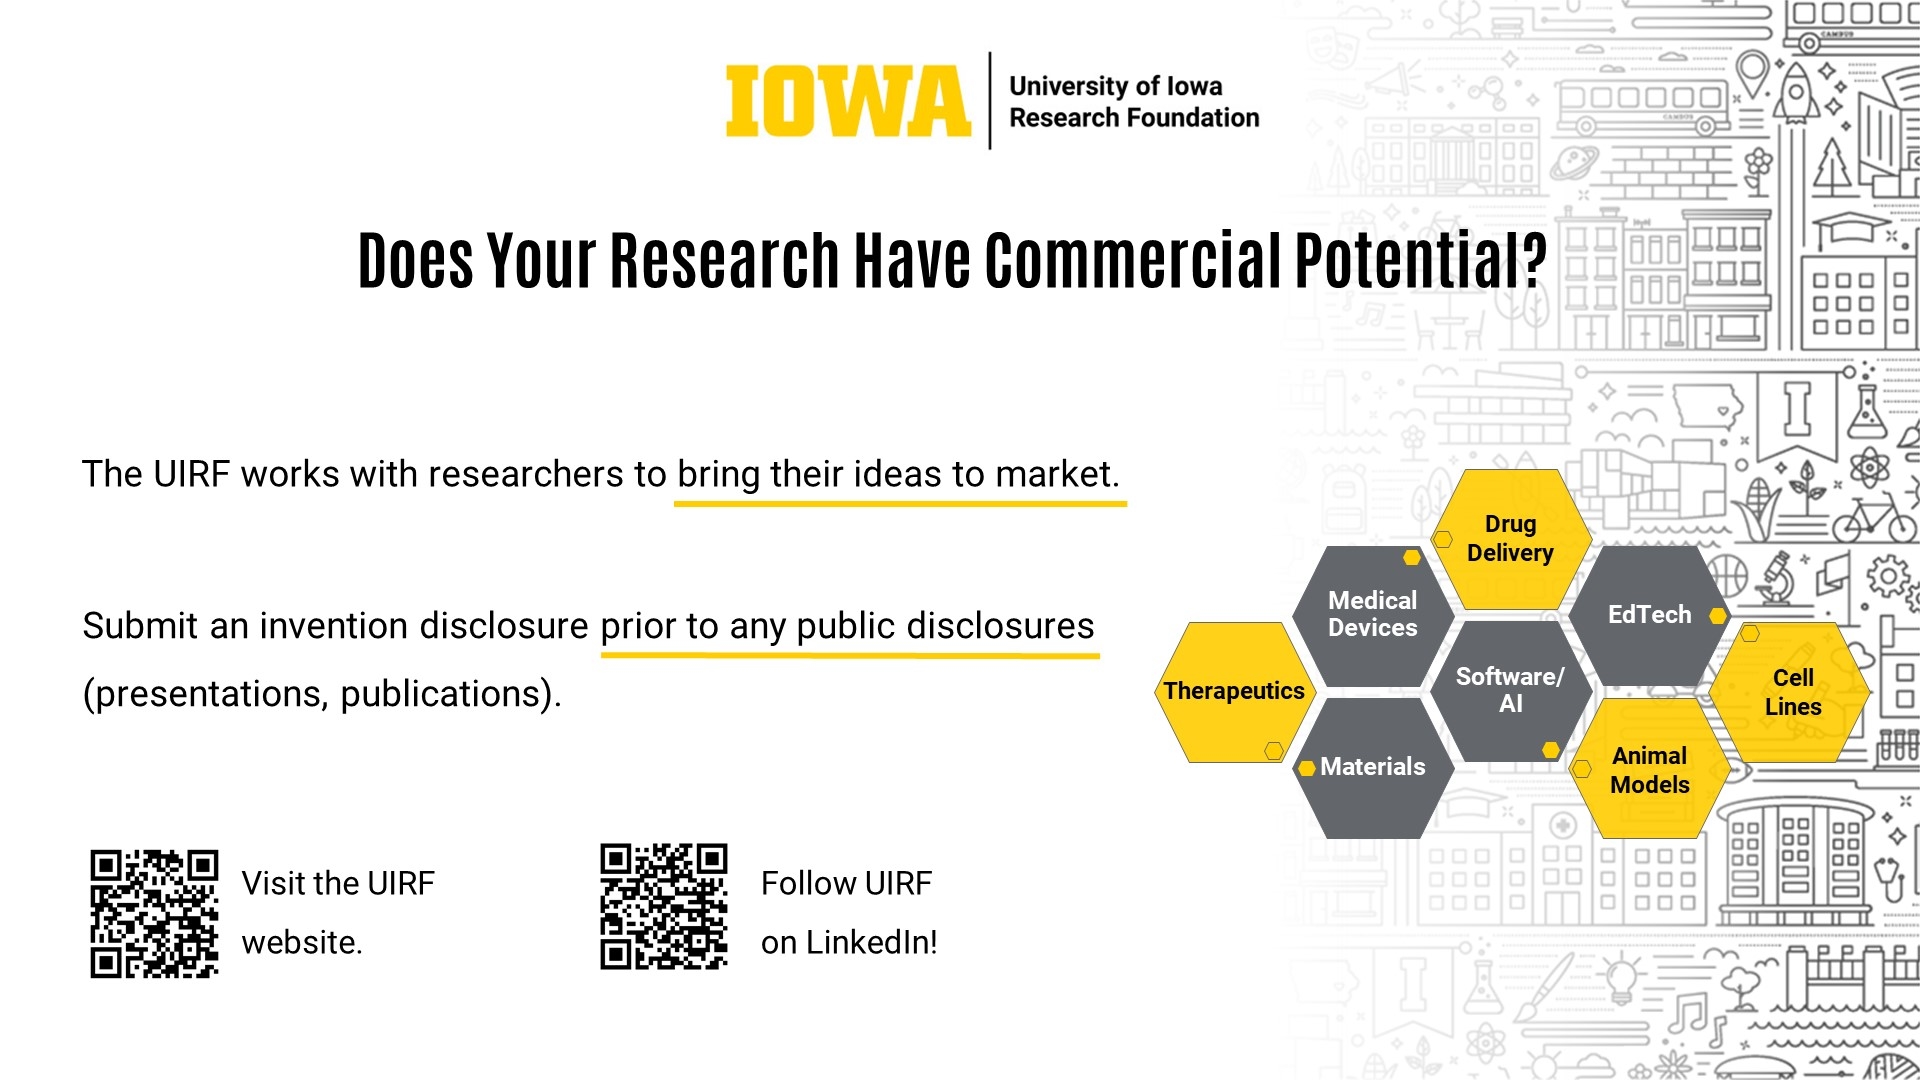 Does Your Research Have Commercial Potential? The UIRF works with researchers to bring their ideas to market. Submit an invention disclosure prior to any public disclosures (presentations, publications).